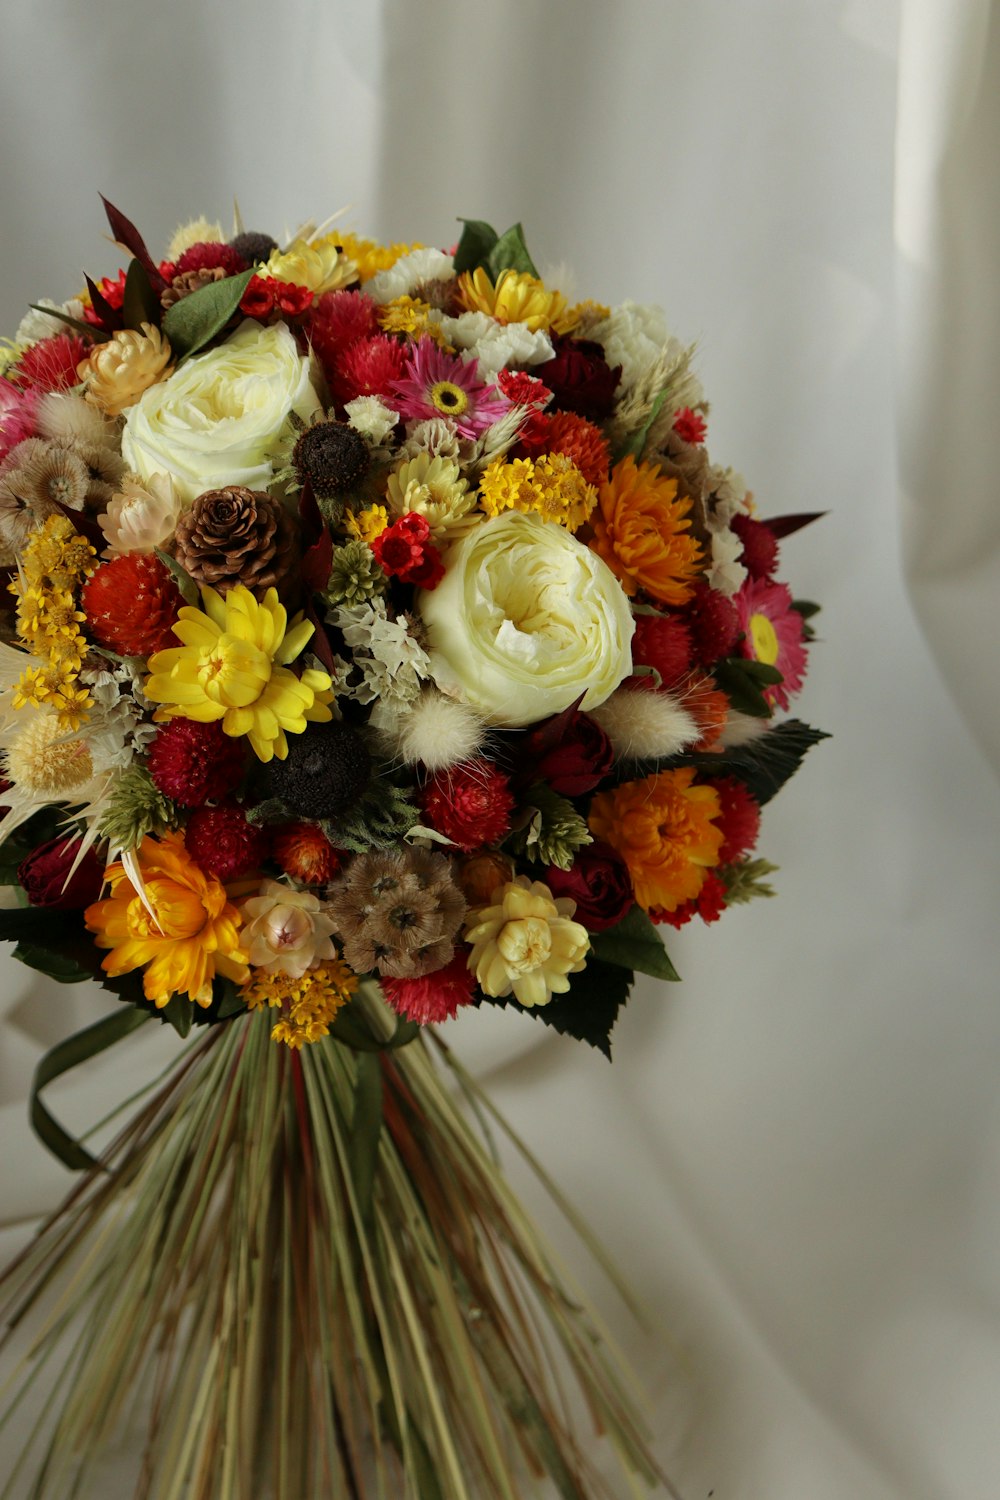 a bouquet of flowers on a white background